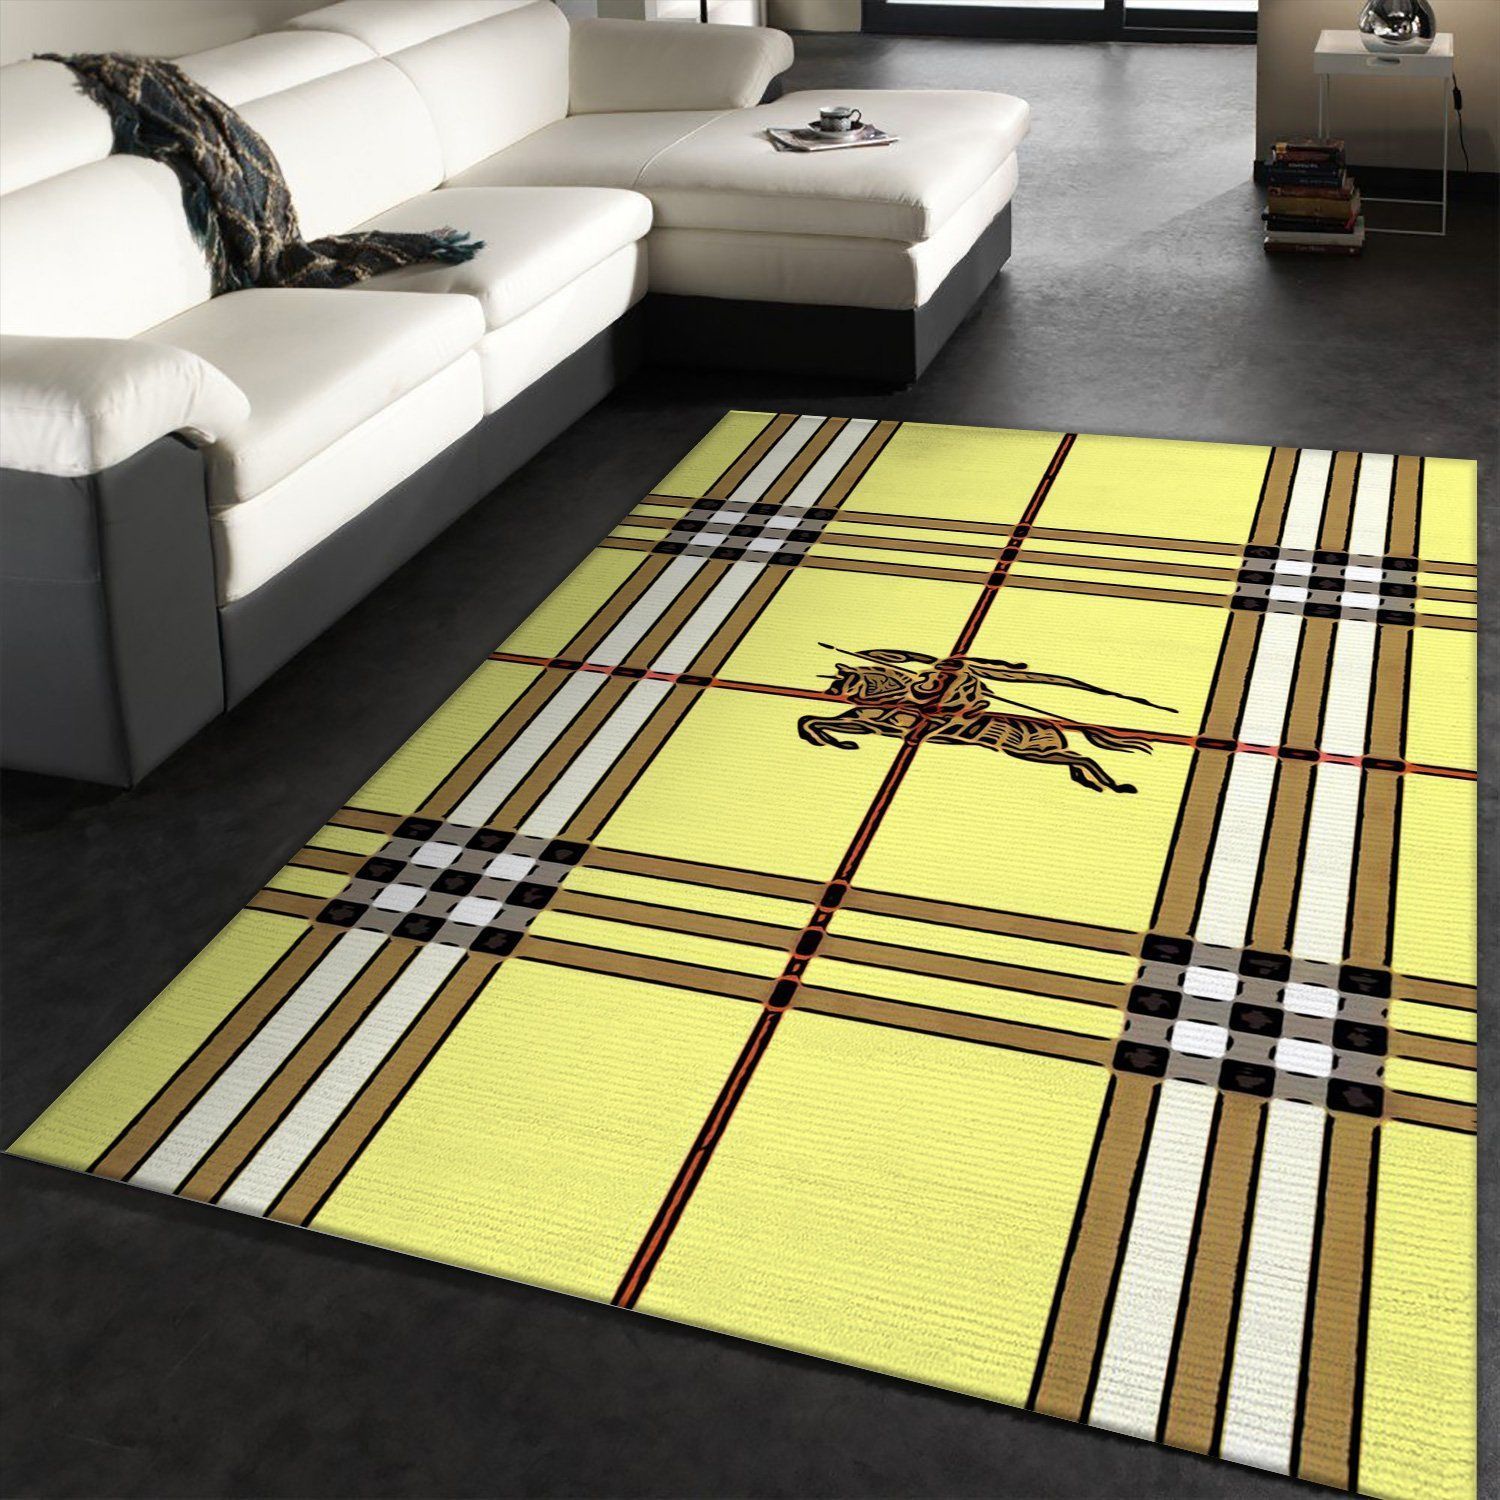 Burberry Luxury Brand 9 Area Rug Living Room And Bedroom Rug Us Gift Decor VH3